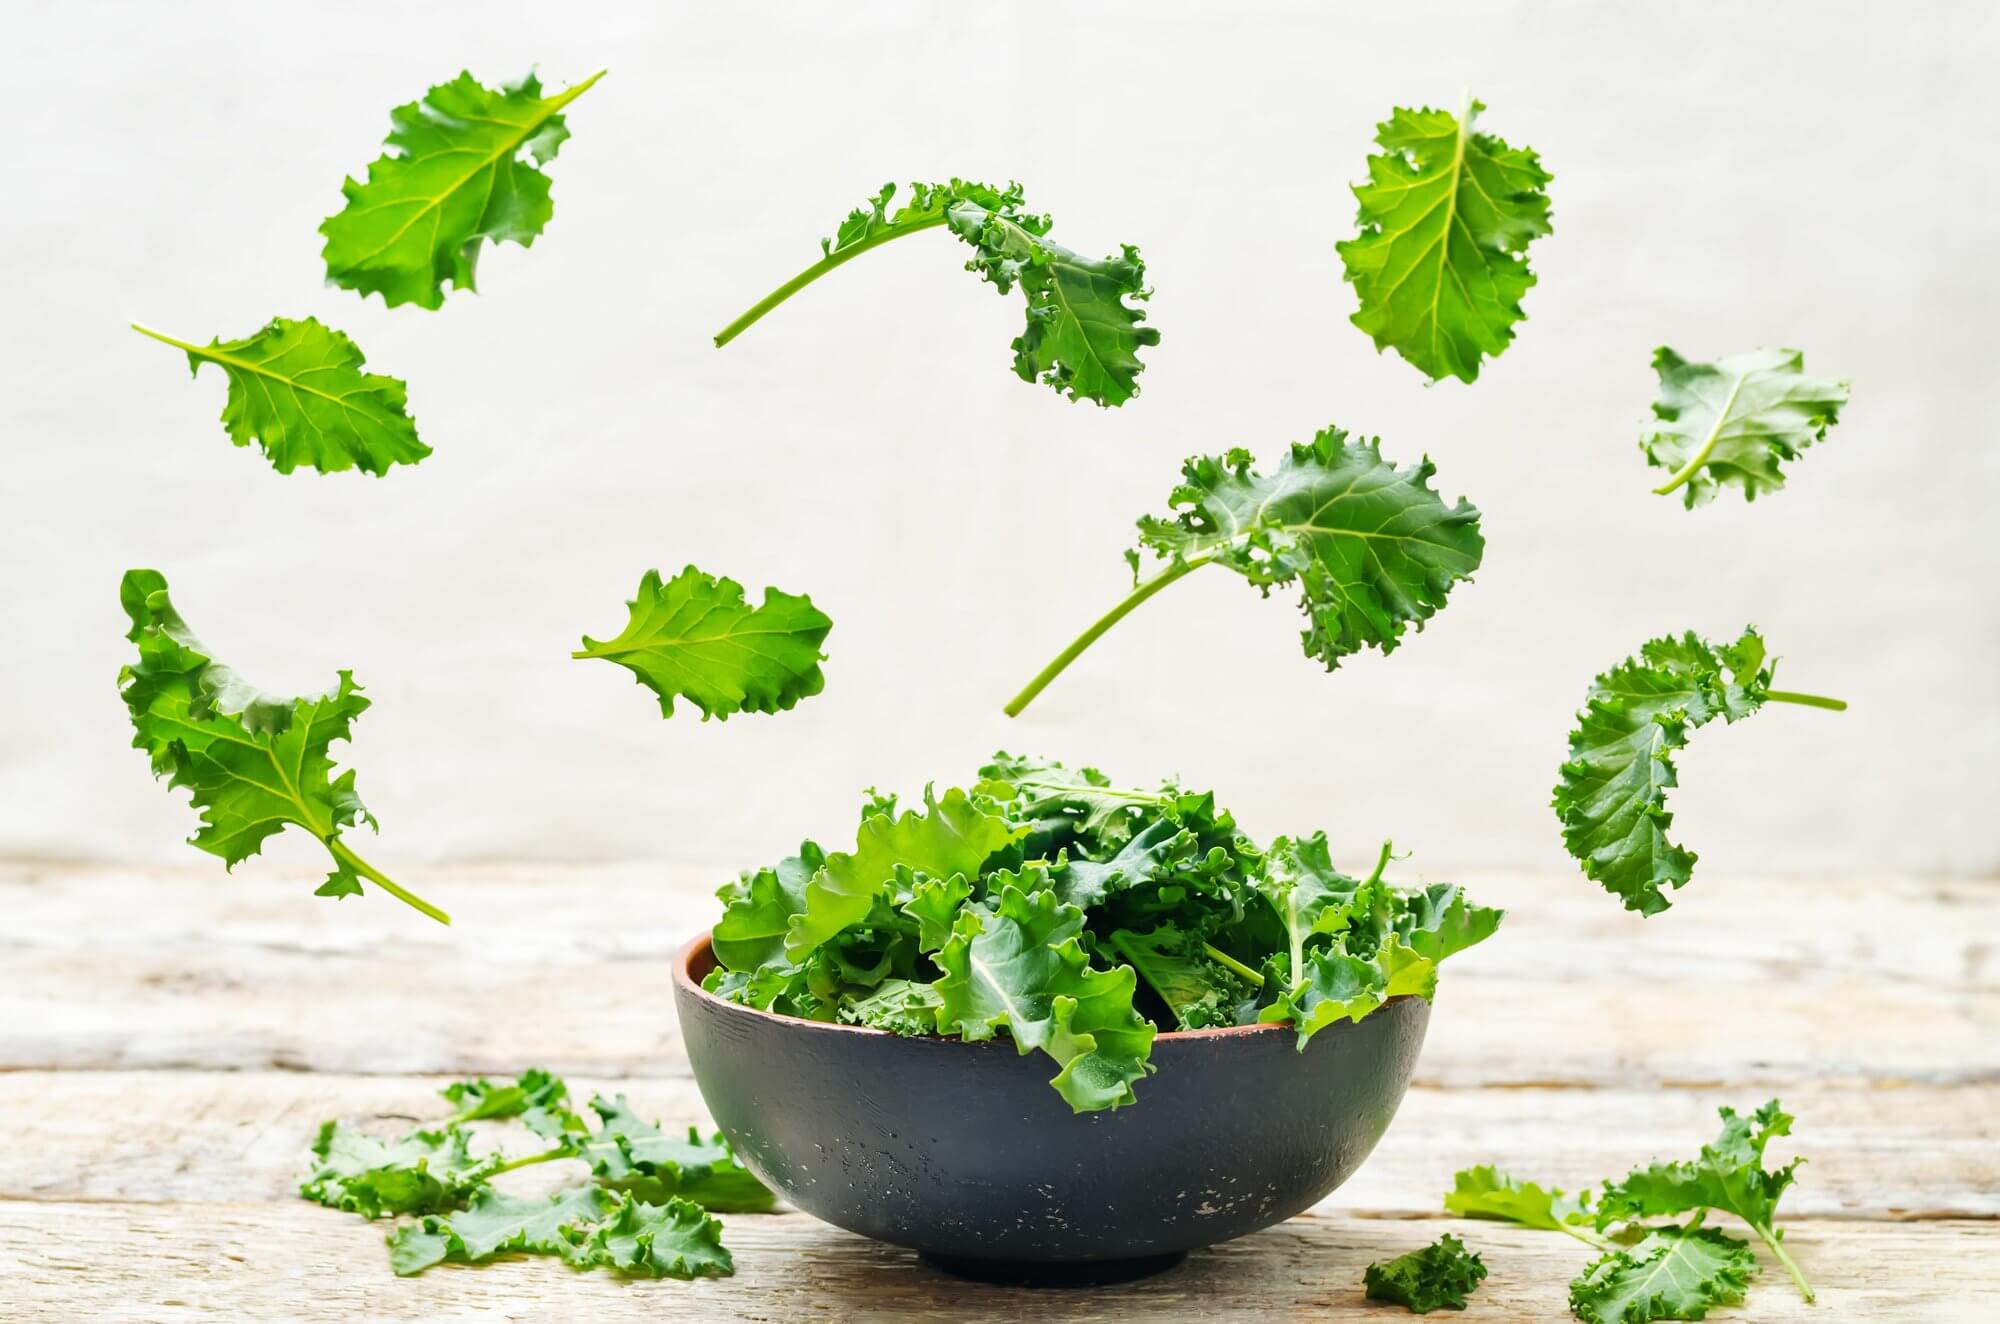 Kale Cleanser: What Is It and How Can I Use It?